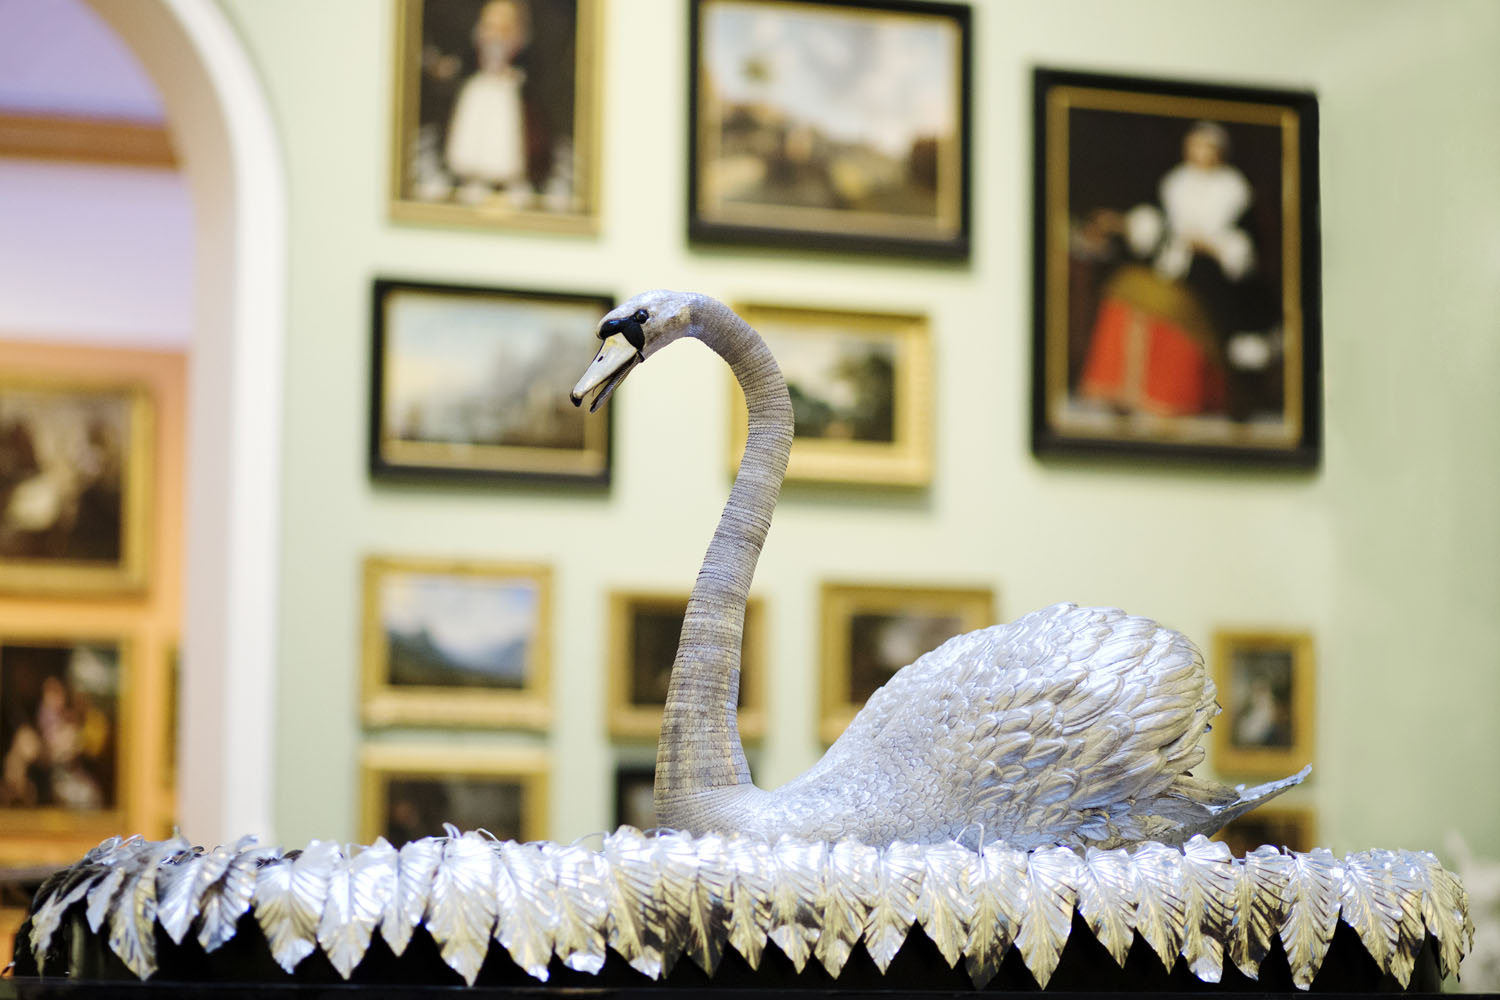 The Silver Swan. Credit: The Bowes Museum